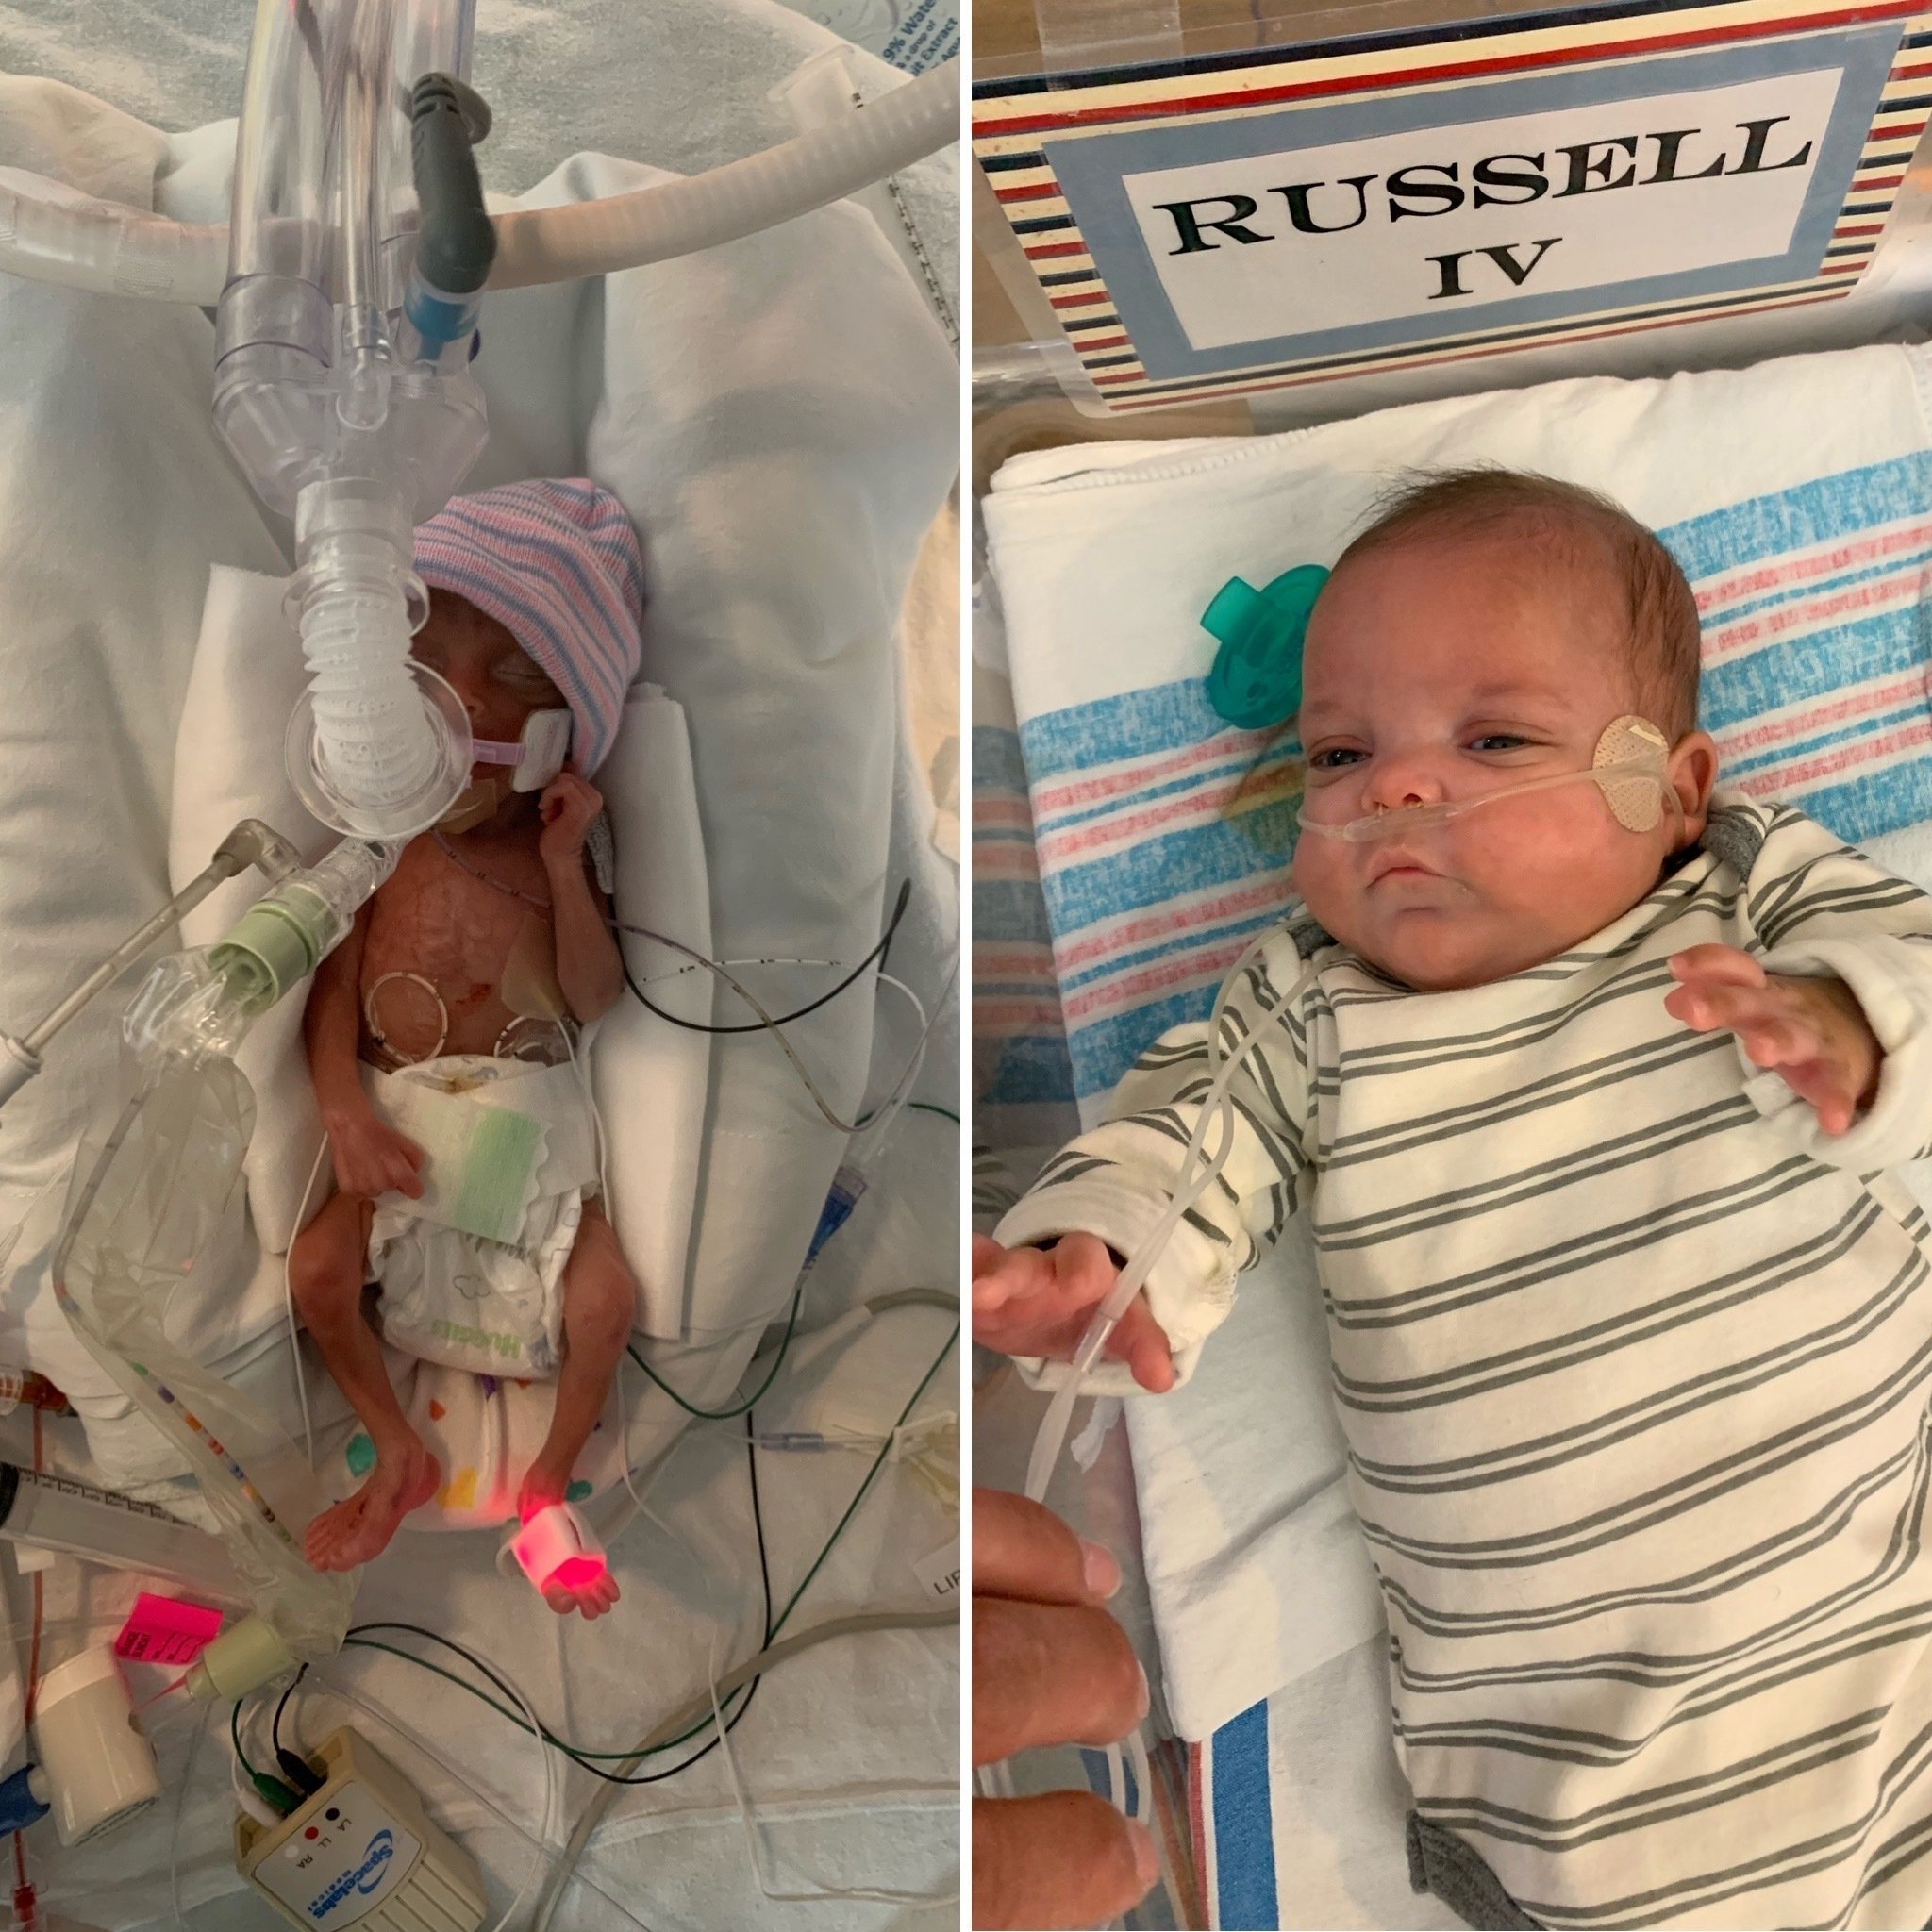 Boy Born After 22 Weeks In Womb Home After 19 Weeks In Nicu Ap News